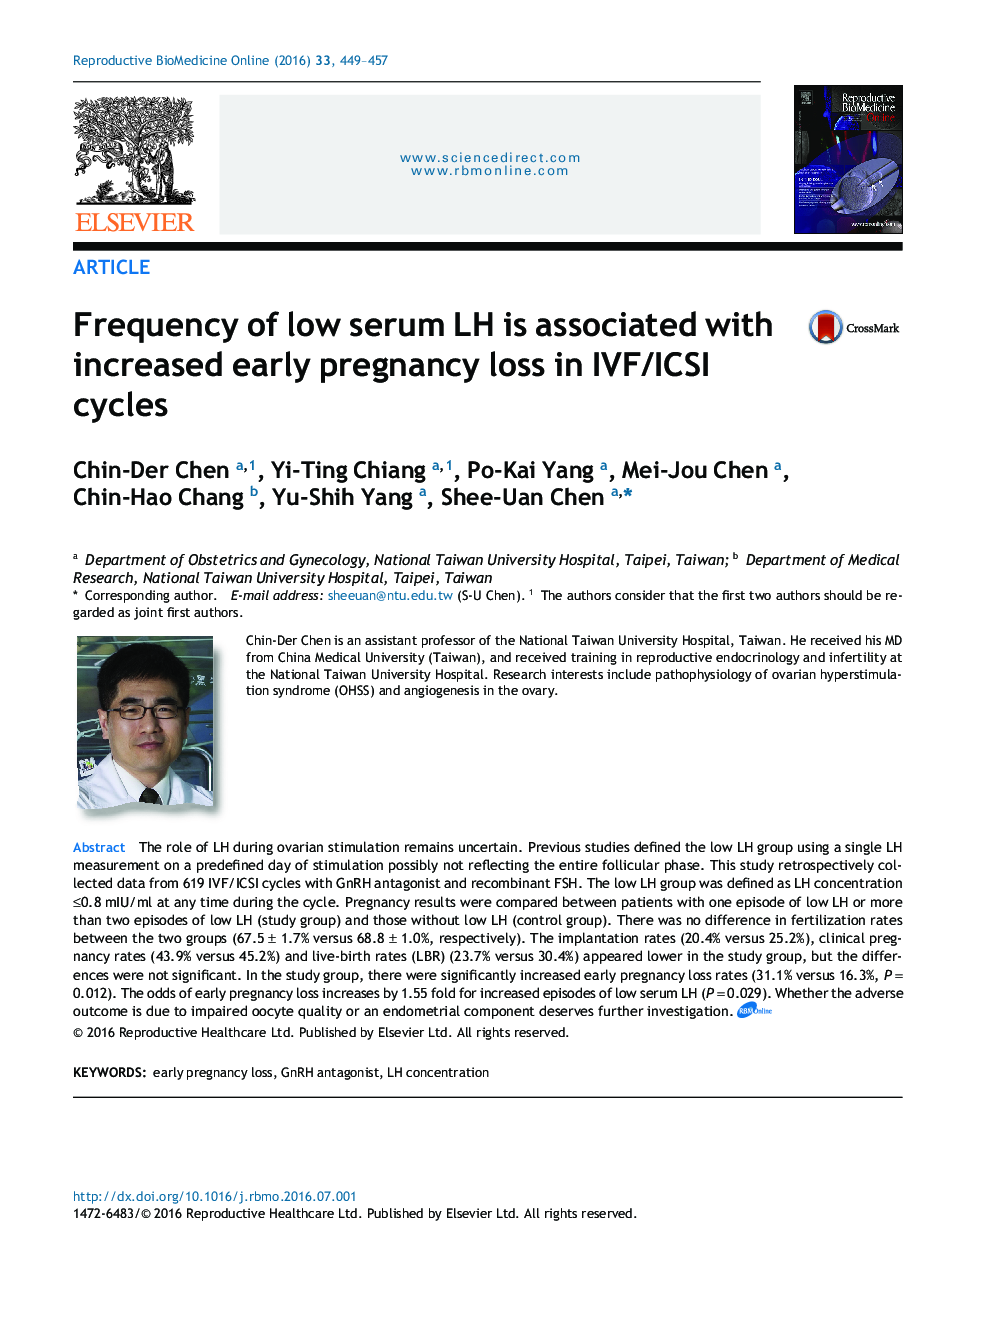 Frequency of low serum LH is associated with increased early pregnancy loss in IVF/ICSI cycles